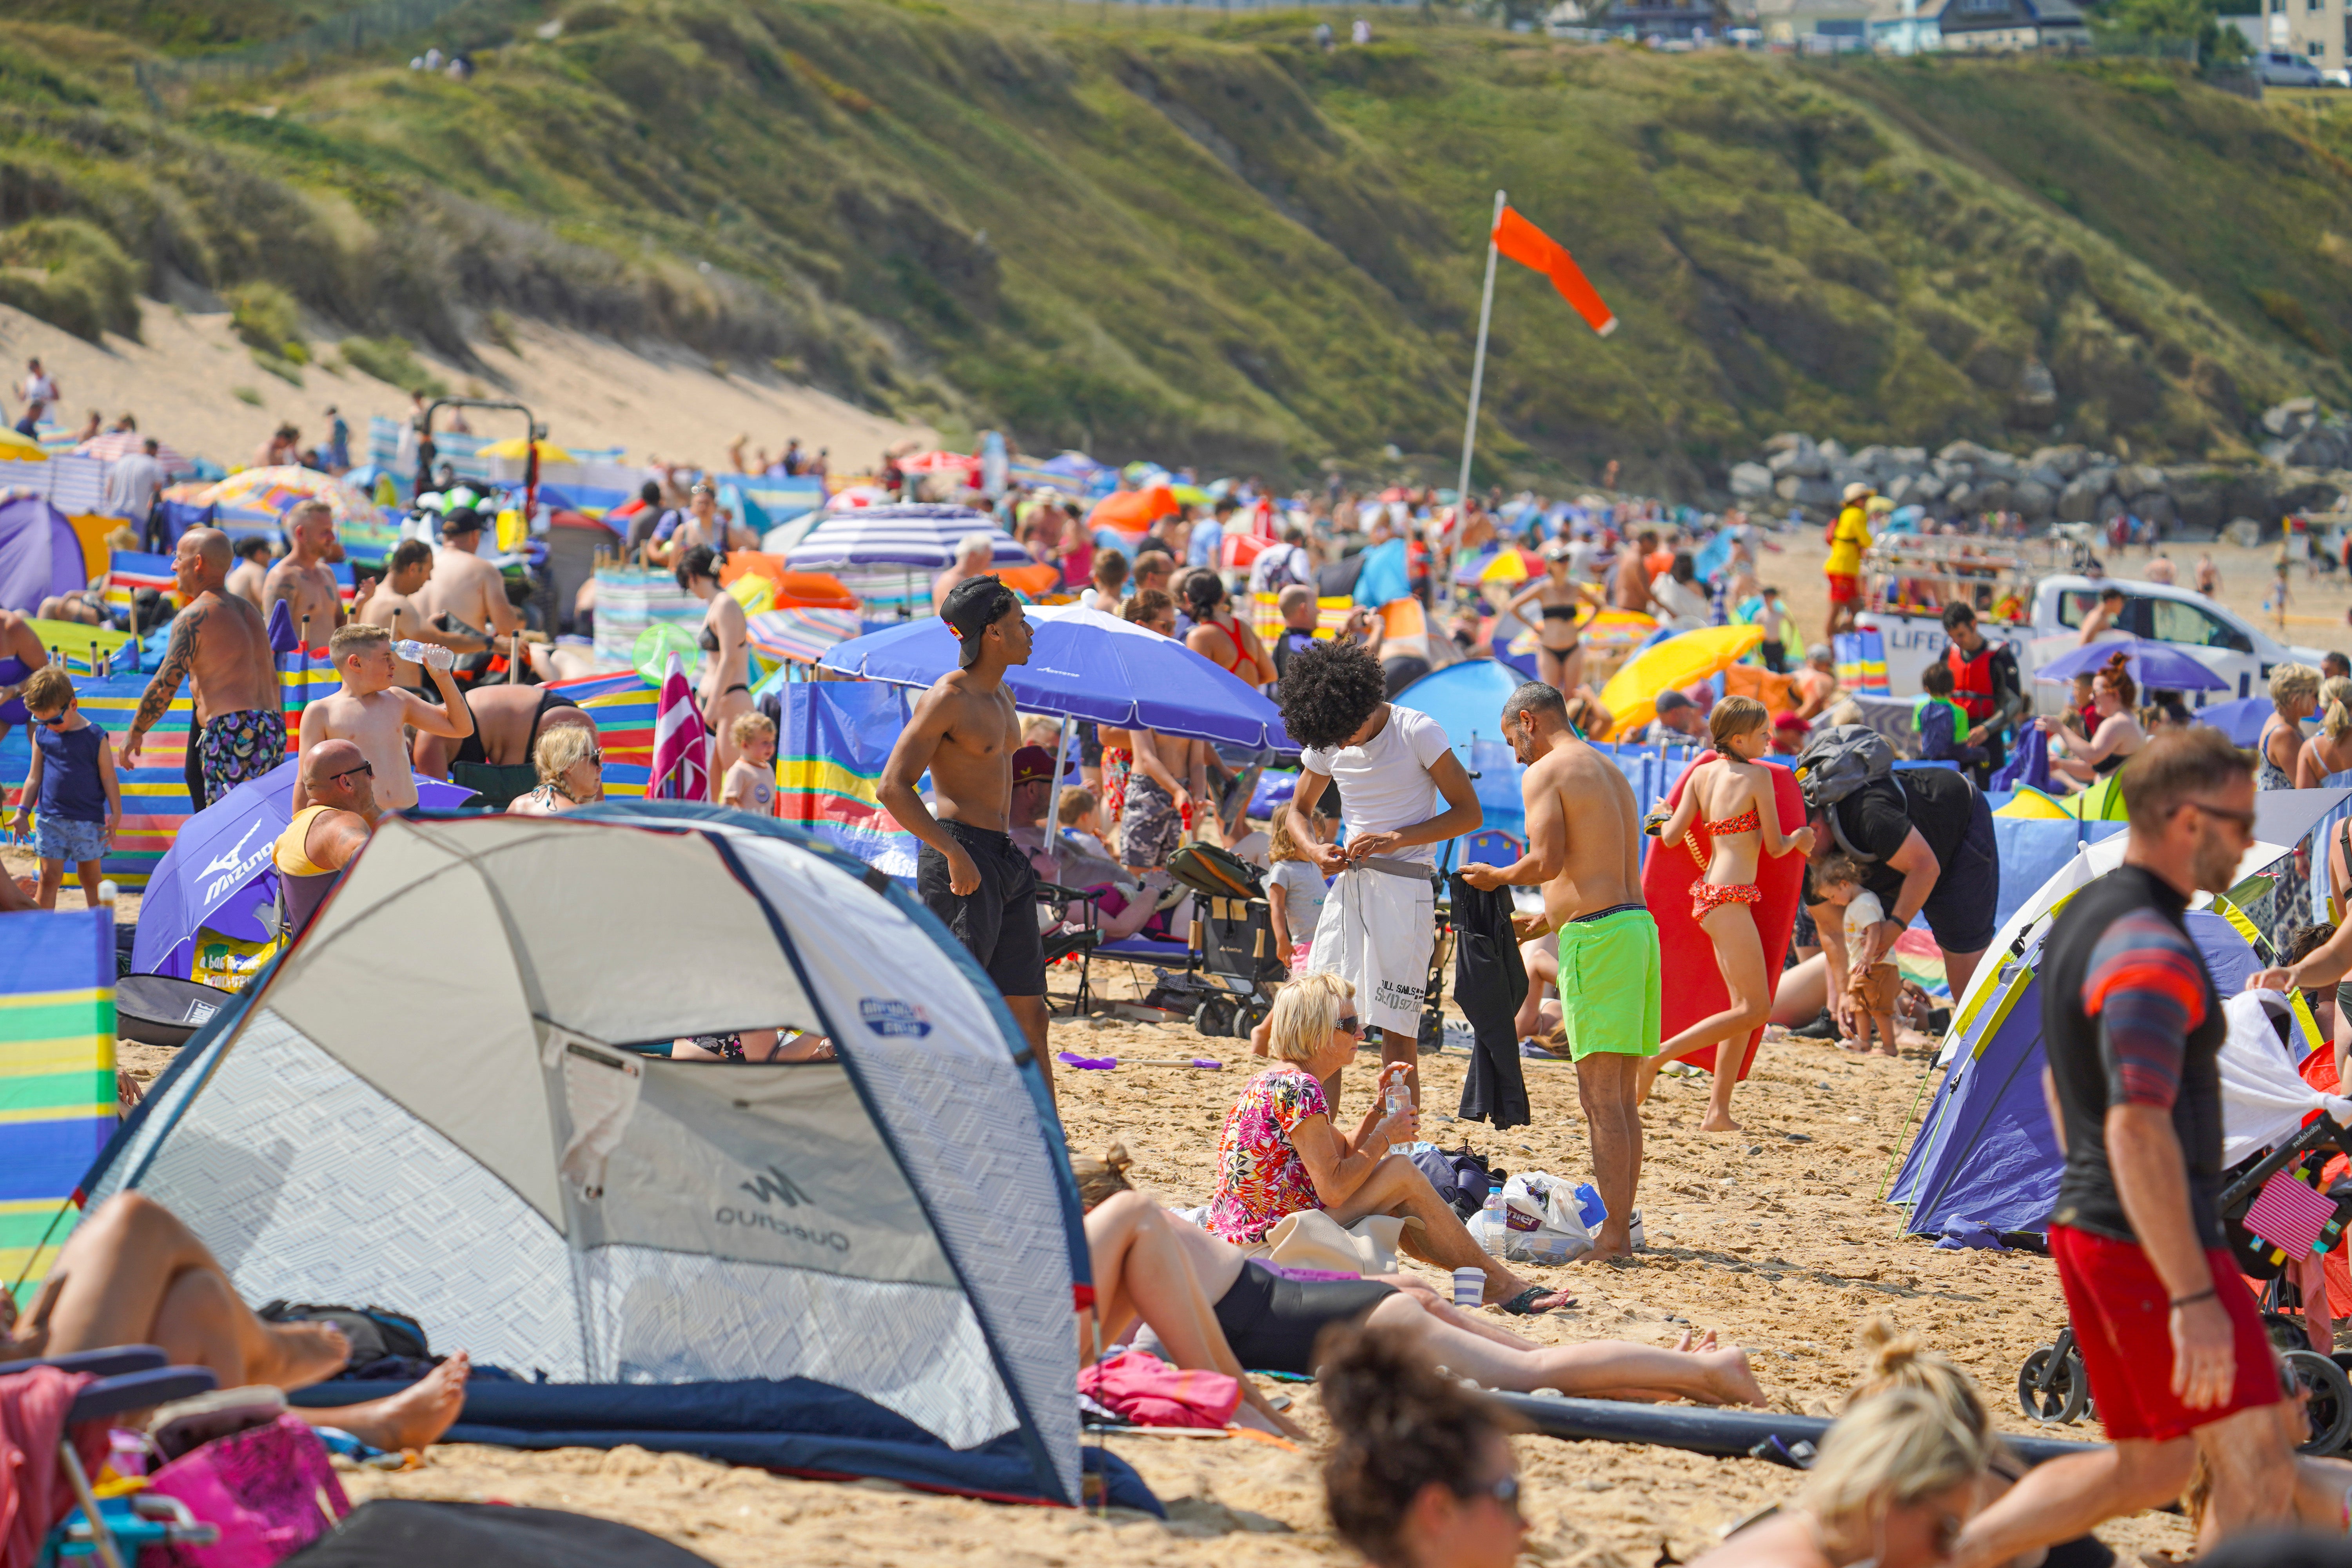 Holidaymakers fill the beach in Newquay - but an inquiry report by Cornwall Council says a spike in visitors can have a negative impact